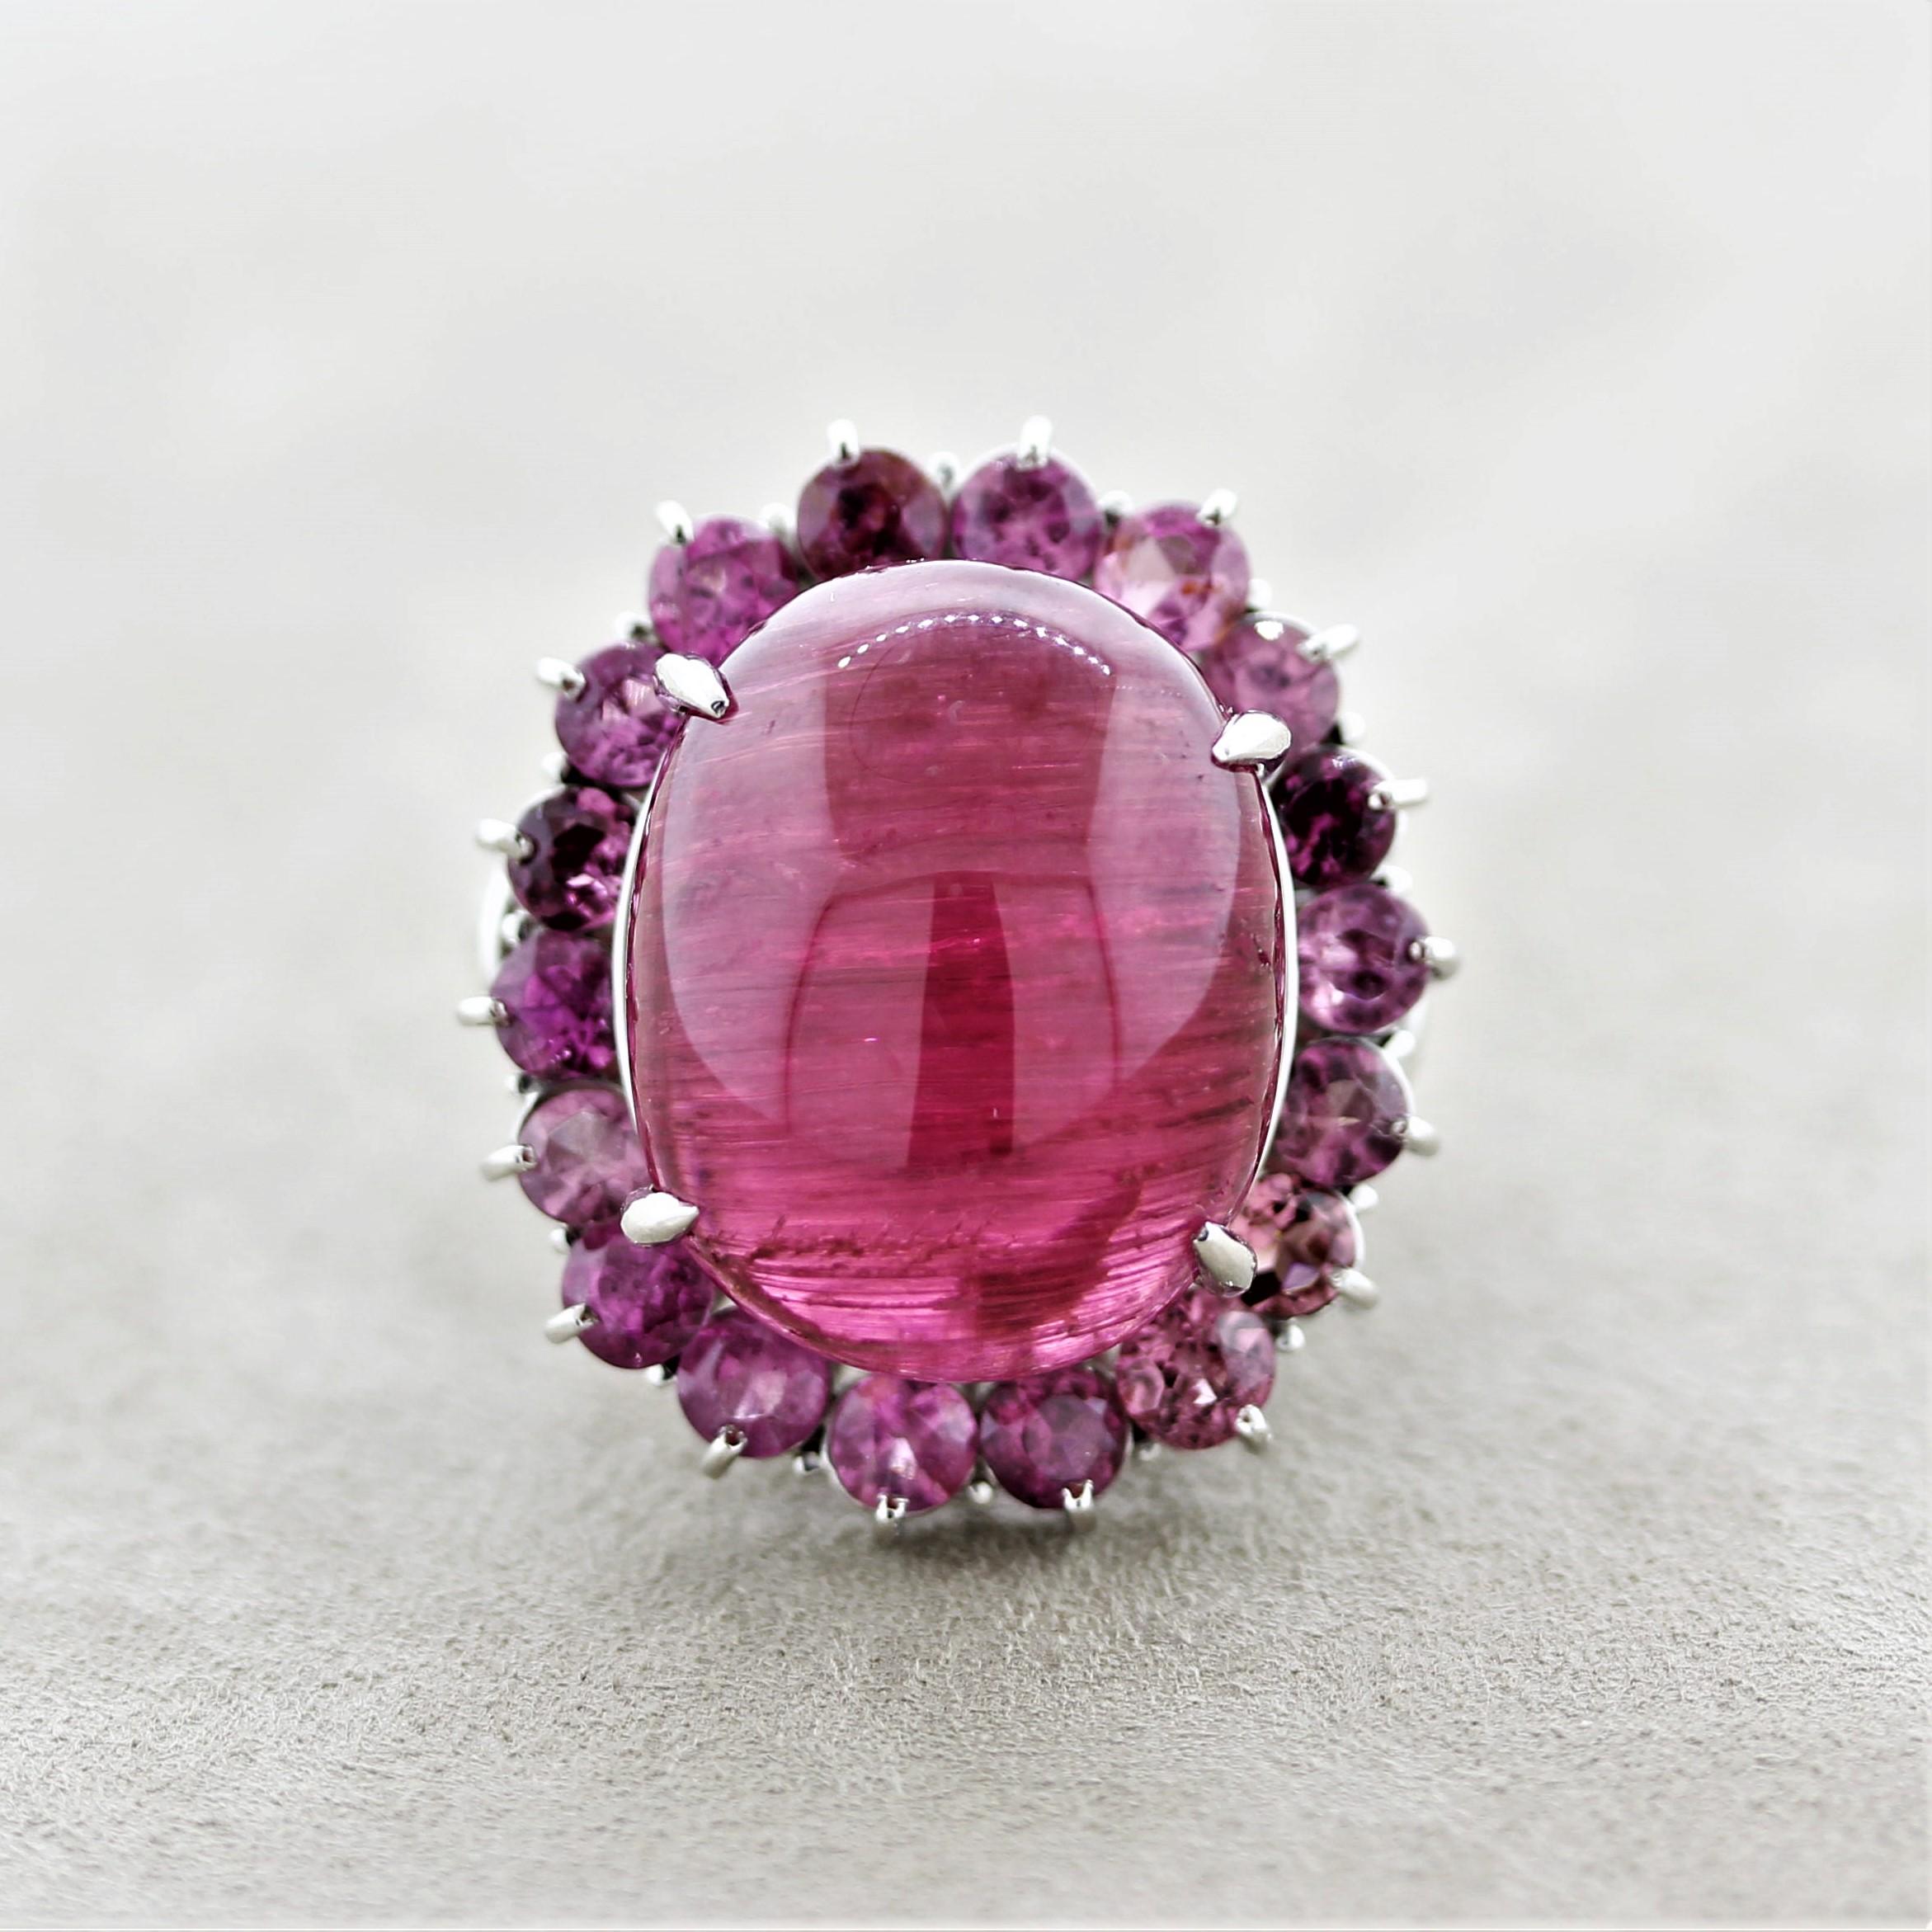 A large and impressive cocktail ring featuring a 27.25 carat cats eye tourmaline. It has a rich royal red color making it a Rubellite in the trade. It is haloed by additional tourmalines, pink tourmalines, weighing 4.18 carats. Adding to that are